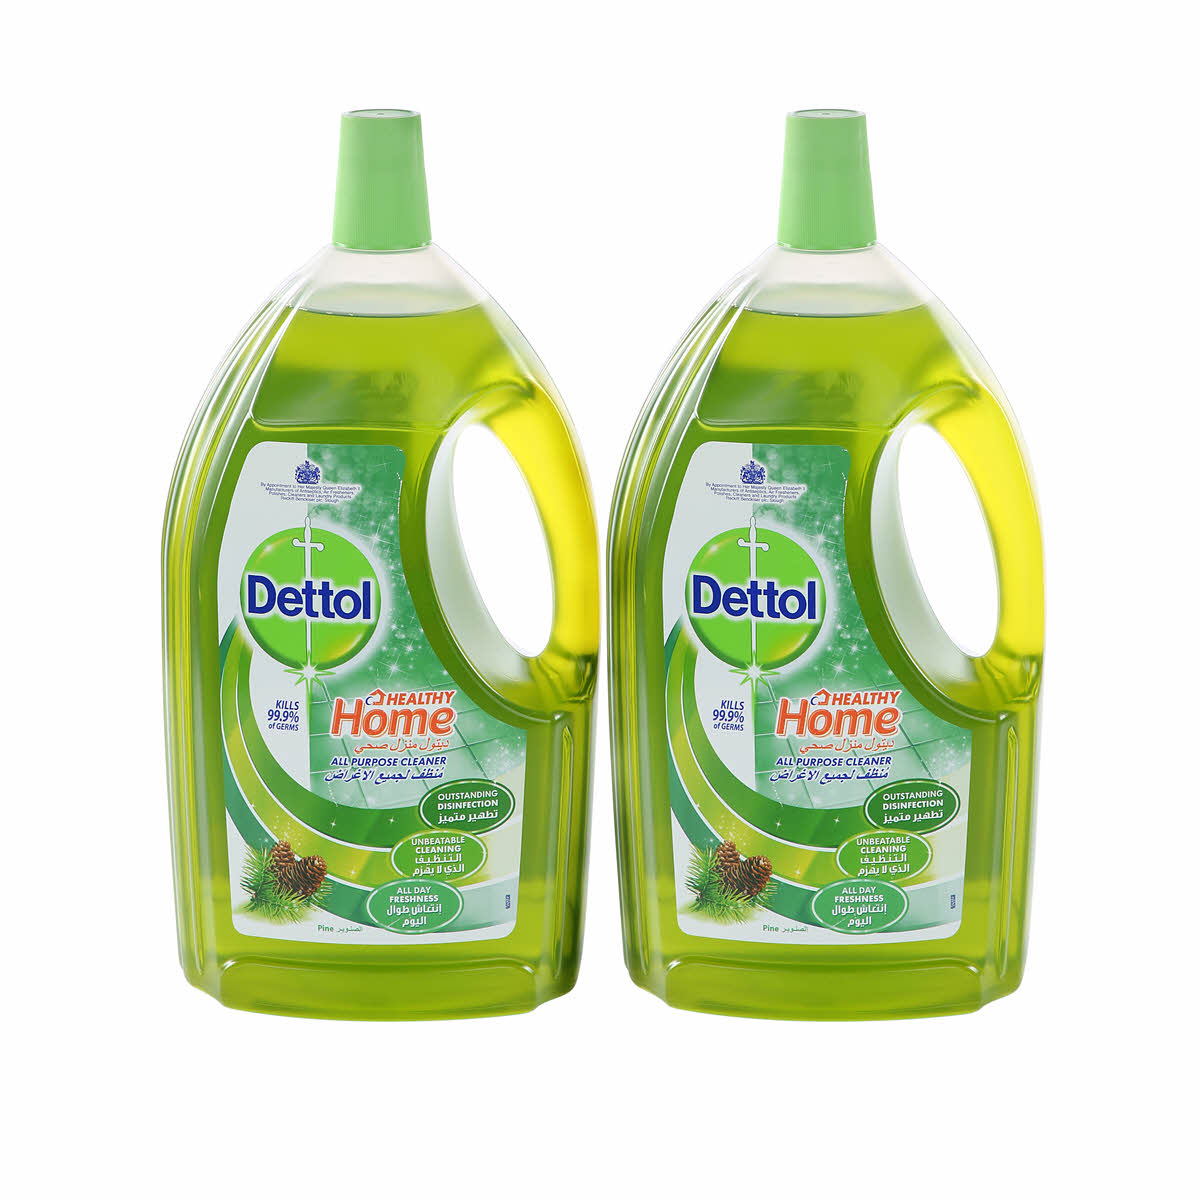 Nettoyant multi usages Emak By Oleo Mac - 1 litre